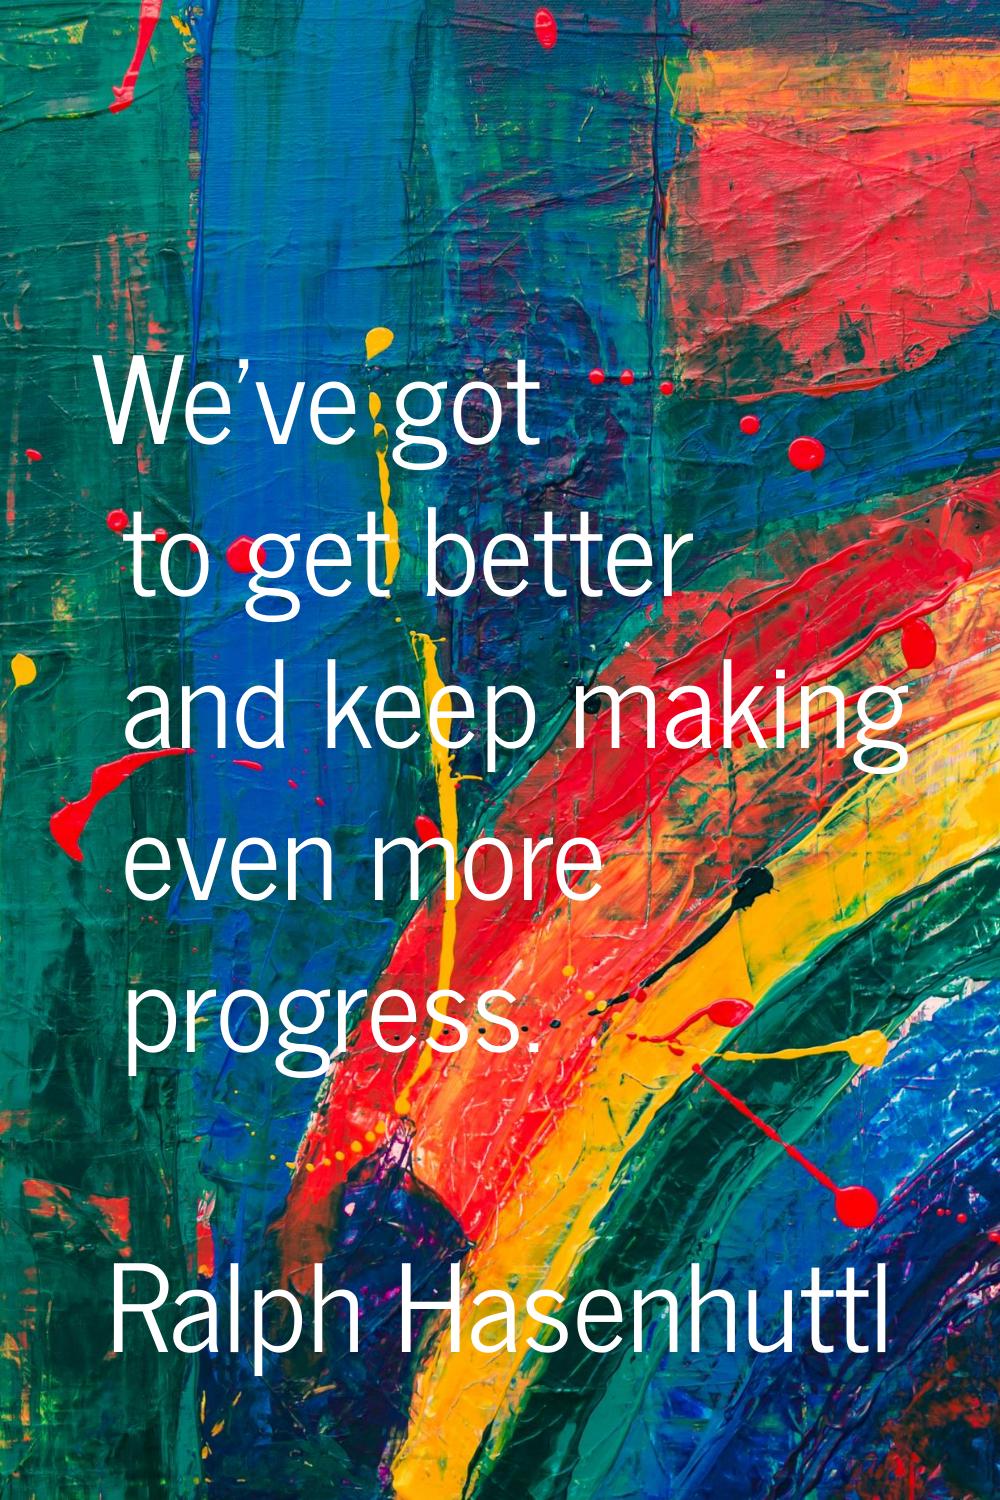 We've got to get better and keep making even more progress.